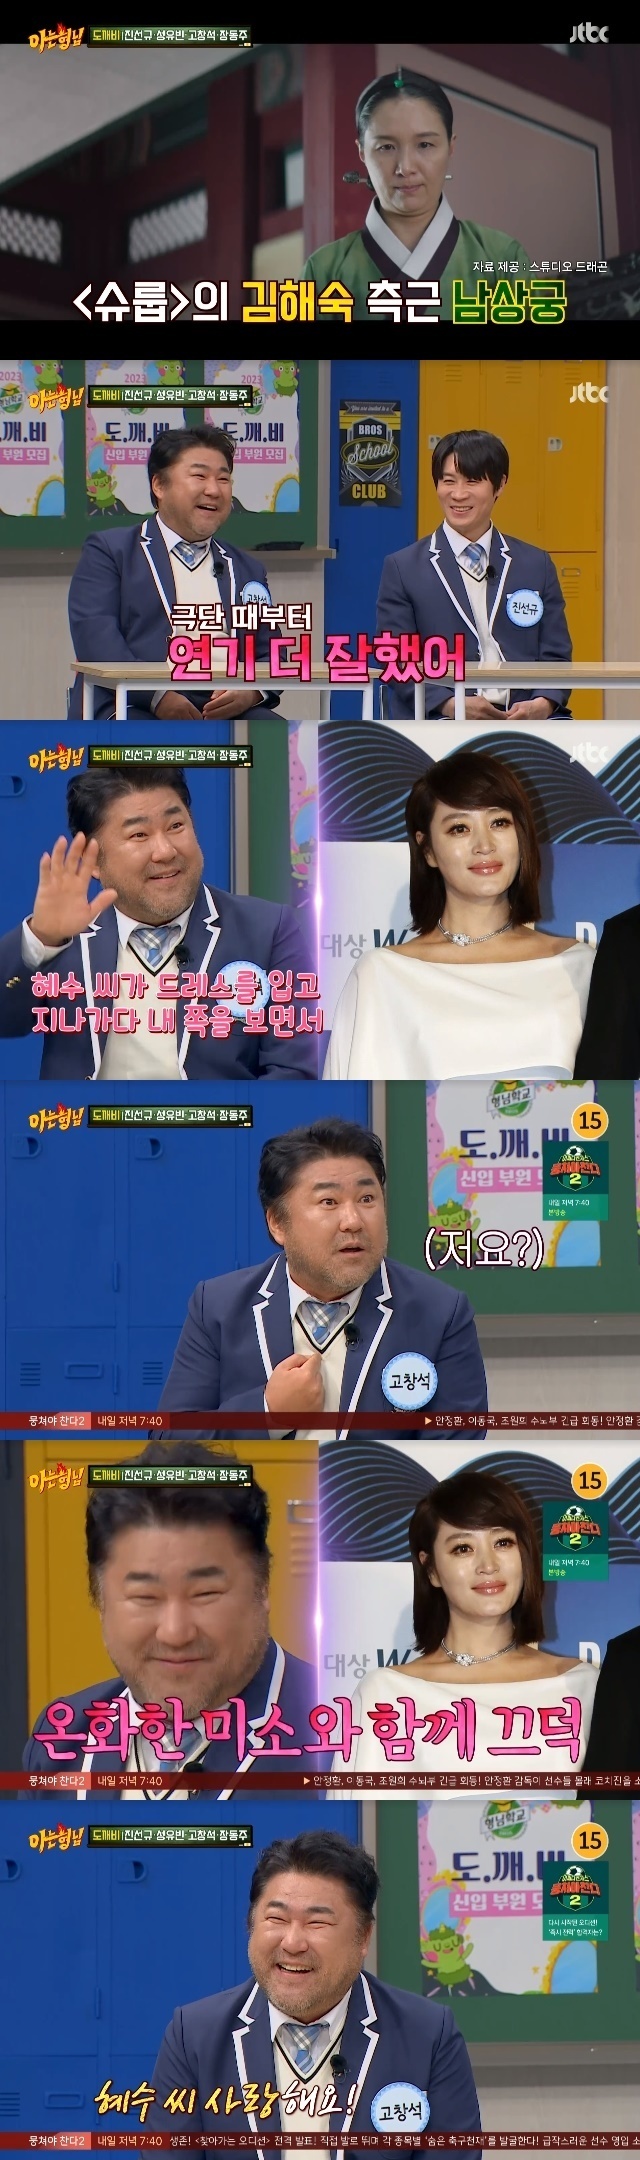 Actor Ko Chang-seok mentioned his wife Lee Jung Eun, and actor Kim Hye-soos misfortune was revealed.Jin Seon-kyu, Sung Yu Bin, Ko Chang-seok, and Long week, the main characters of the movie Count (director Kwon Hyuk-jae), appeared as guests in the 371th episode of JTBCs entertainment show Knowing Bros (hereinafter referred to as Knowing Bros), which aired on February 18.On the same day, Ko Chang-seok boasted that his wife was also an actress, saying, My wife came out of Schrup to Nam Sang-gung. My wives were better at Acting than Sun Kyu and I.Ko Chang-seok said, I have been married for 24 or 25 years. Once upon a time, my wife asked me to monitor the performance during the performance. I went to see the performance and I was honest about the bad thing.My wife sprinkled water and said, How good are you? After that, they never interfere with each other. Ko Chang-seok had a relationship with Kim Hye-soo, apart from his wife who appeared in Shrop. On this day, Ko Chang-seok said, I did not know us when I remembered the best time.I went to the film festival, but it was obscure. I was sitting in the corner because of the award, and Kim Hye-soo walked by wearing a dress and greeted me.